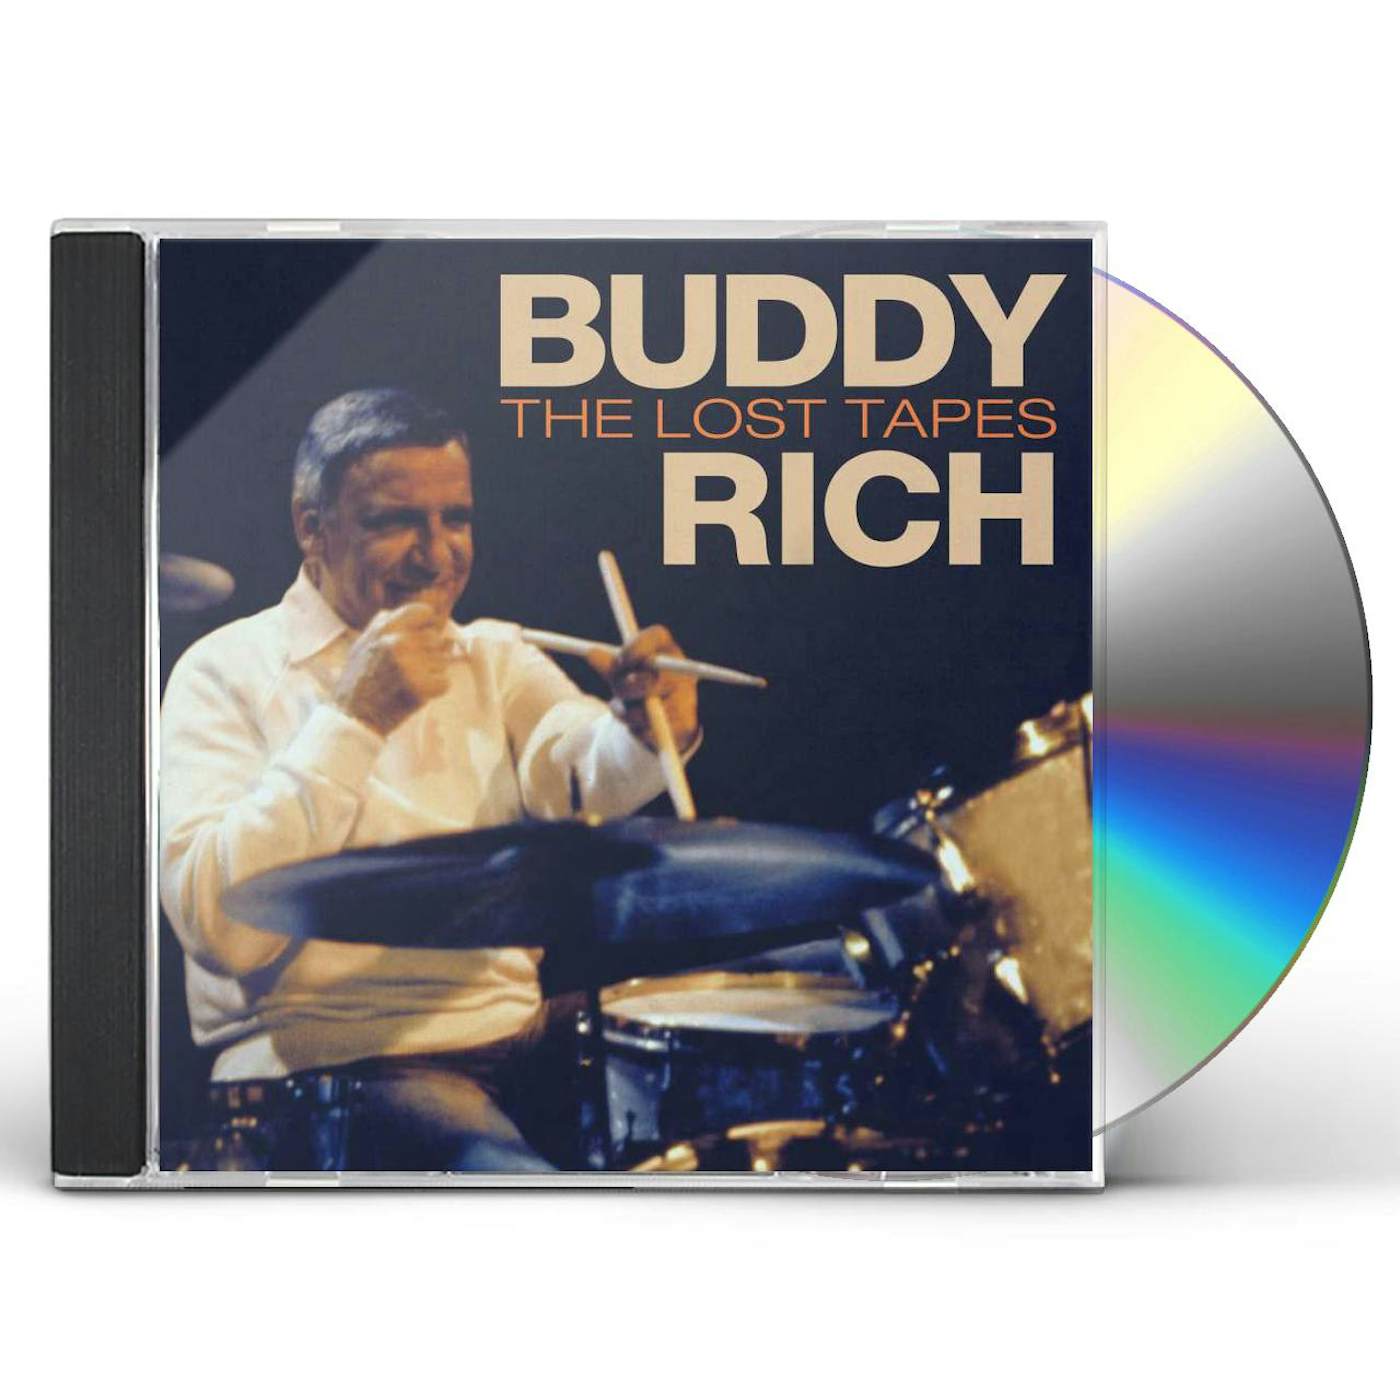 Buddy Rich LOST TAPES CD